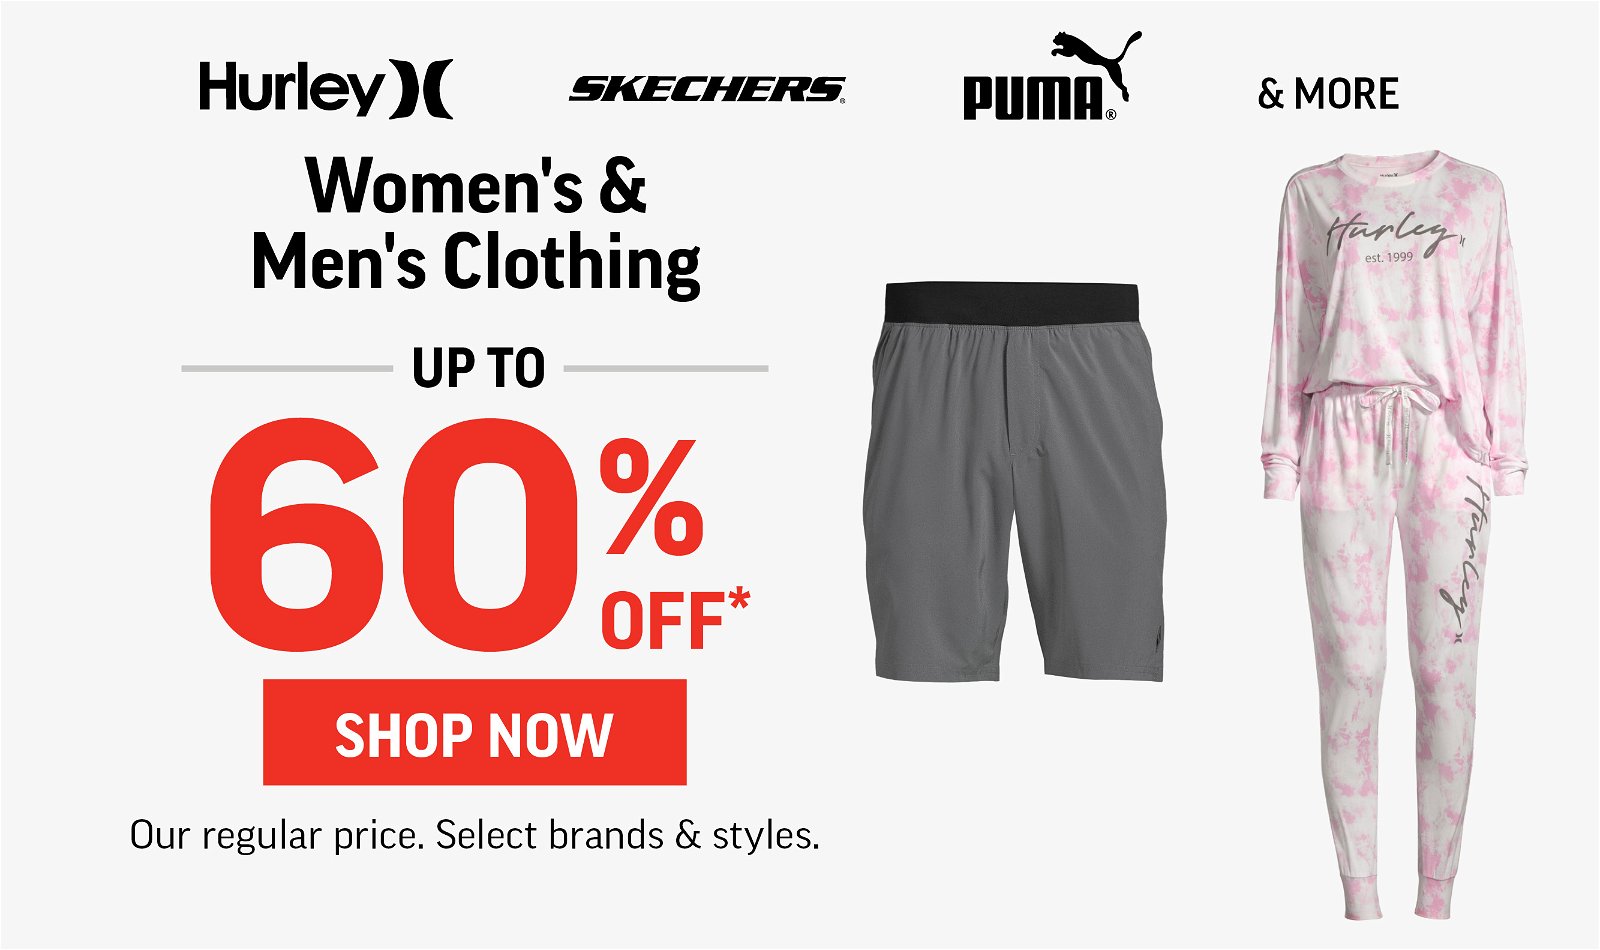 WOMEN'S & MEN'S CLOTHING UP TO 60% OFF